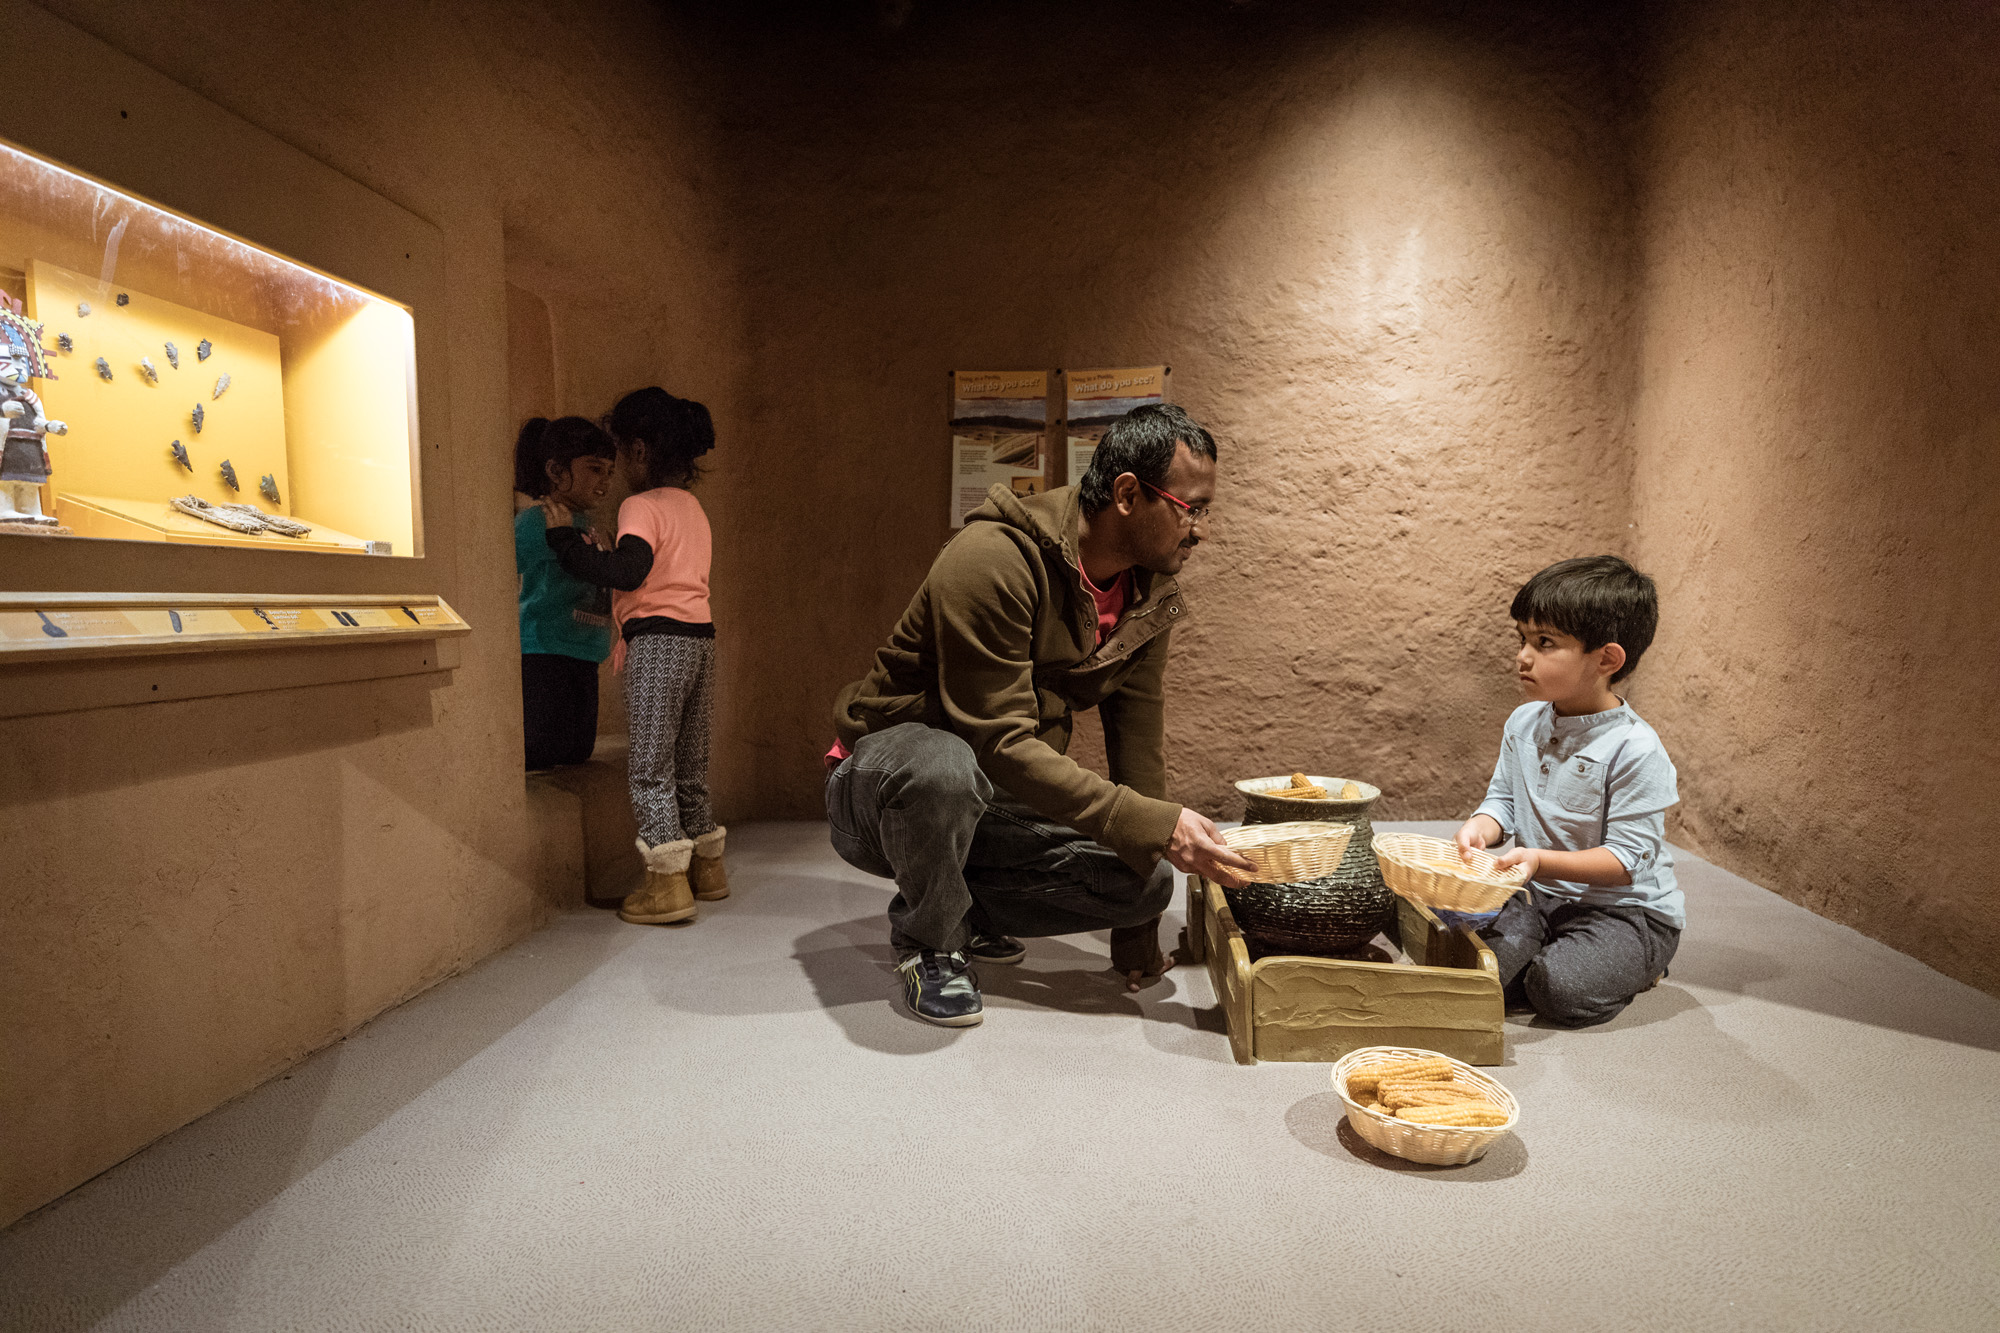 Inside a recreated pueblo in the Crown Family PlayLab, a child and an adult play with baskets holding fake corn. Two girls stand in the doorway nearby.